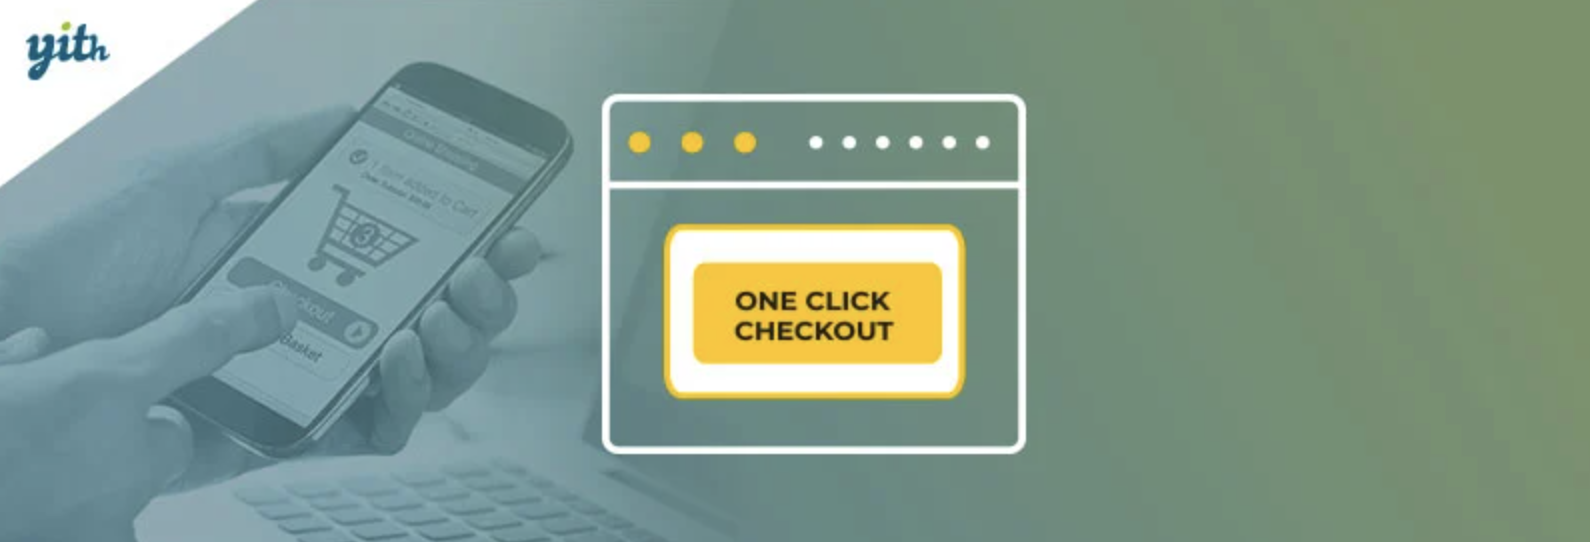 YITH WooCommerce One-Click Checkout 